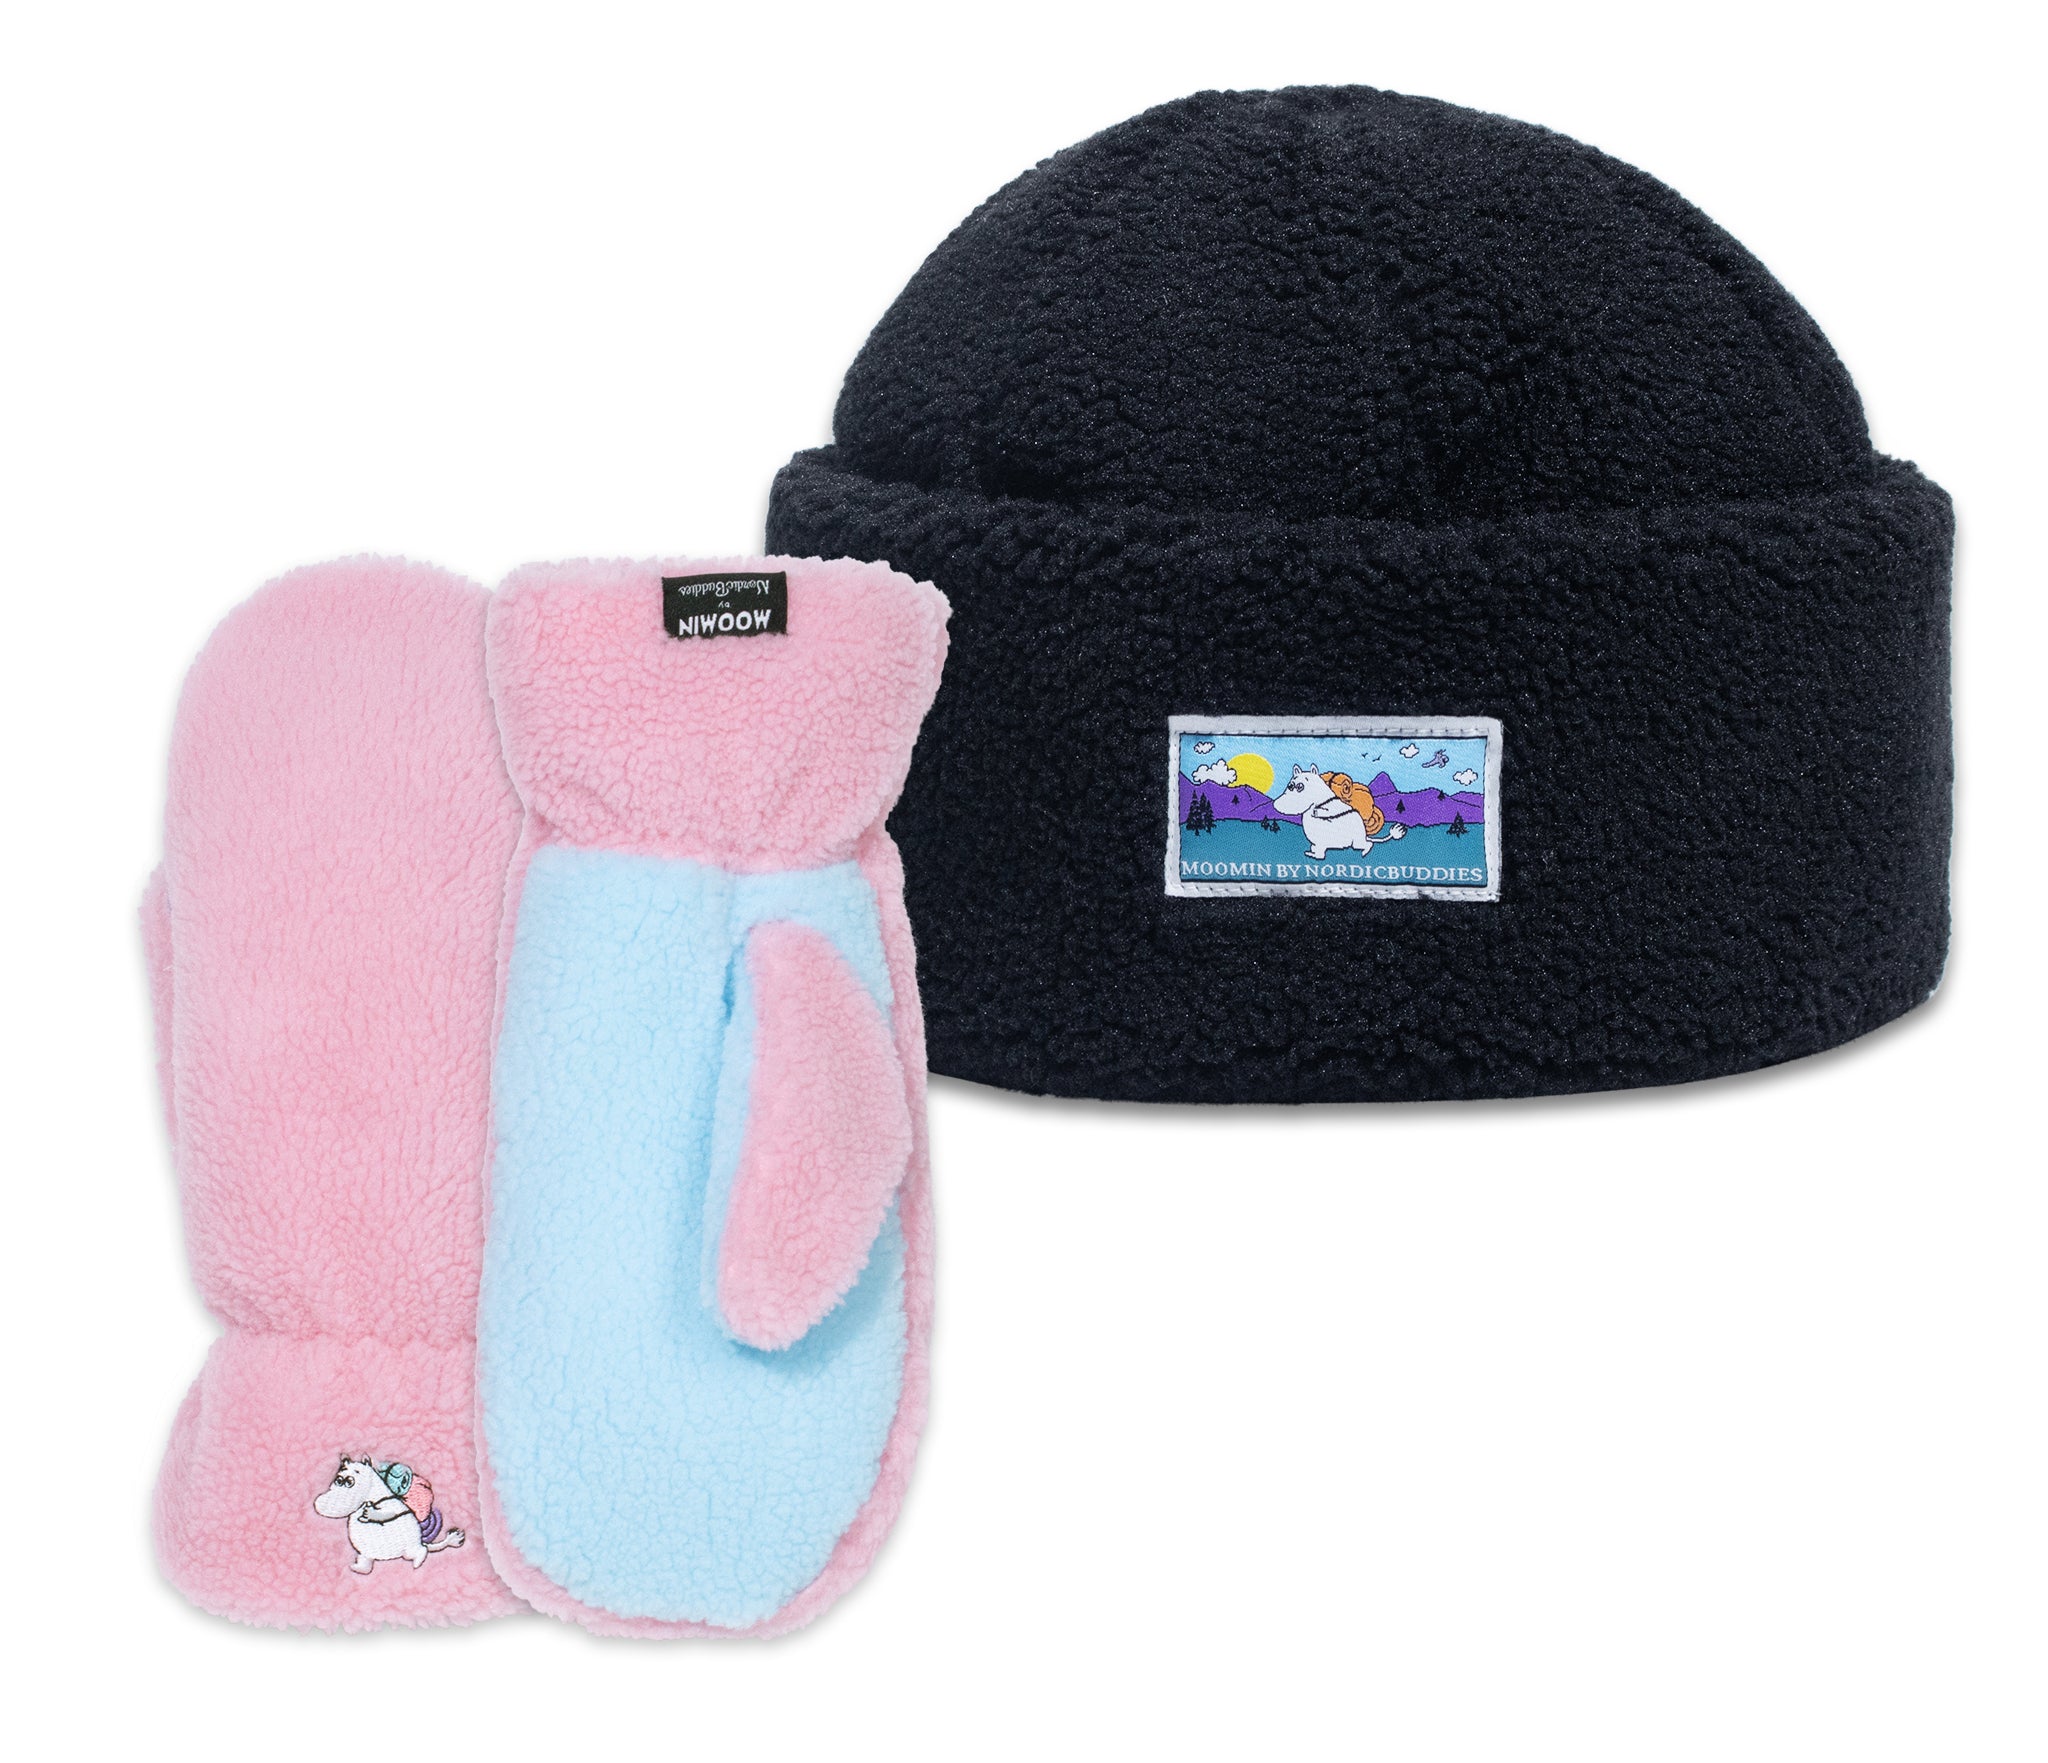 Sniff Fleece Earflap Cap Brown - Nordicbuddies - The Official Moomin Shop